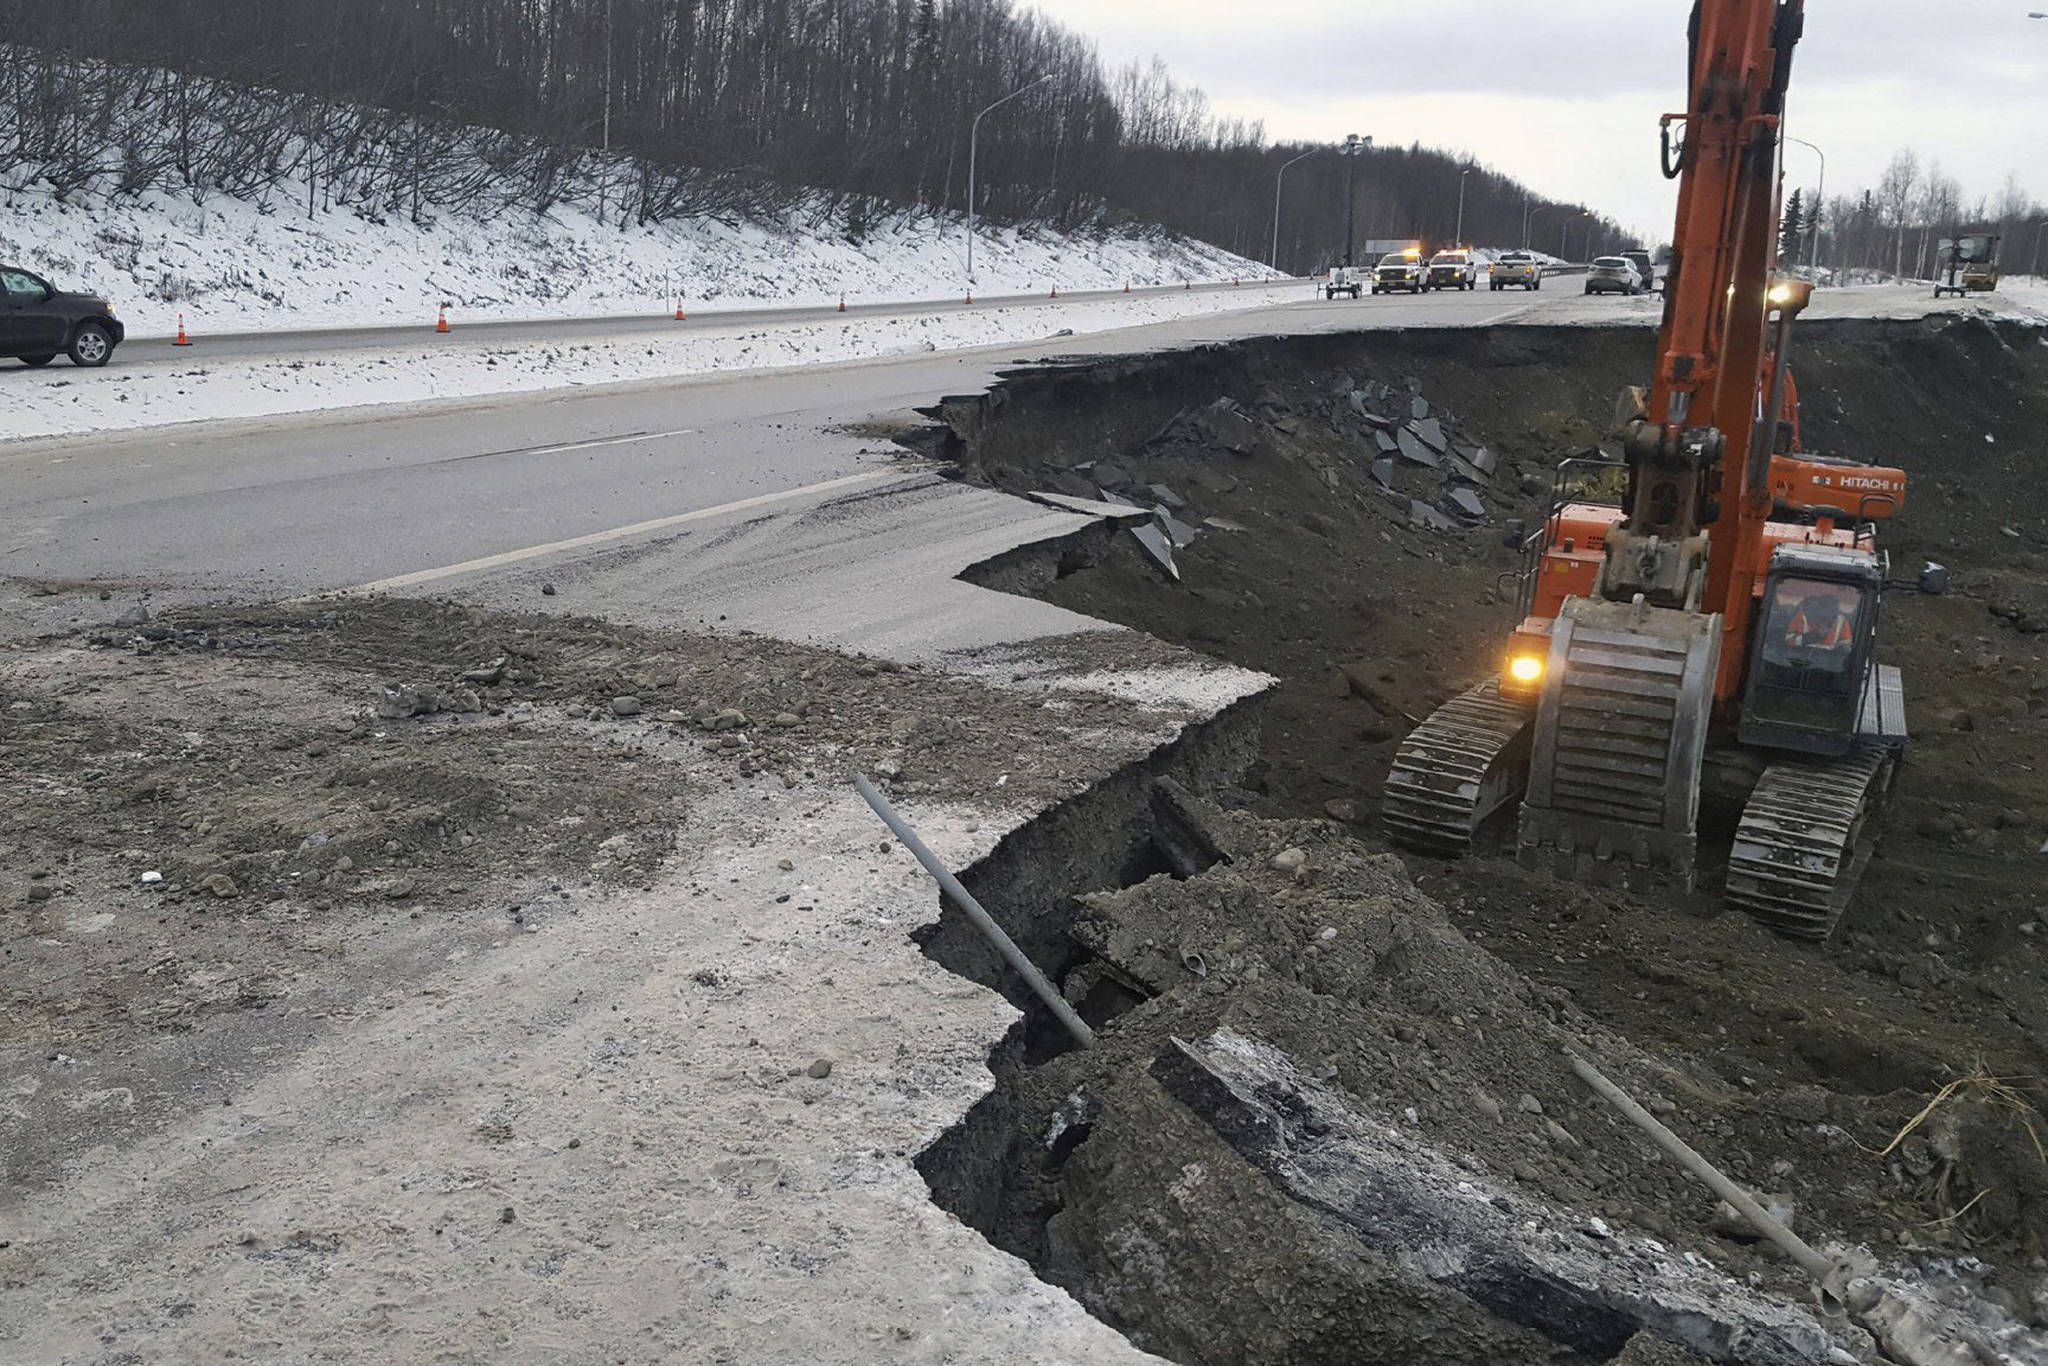 This photo provided by Chris Riekena shows excavation work being conducted Saturday, Dec. 1, 2018, near the Mirror Lake exit of the Glenn Highway near Eklutna, Alaska, to make the highway ready for repaving. The highway was heavily damaged in several spots following a magnitude 7.0 earthquake on Nov. 30, 2018. (Chris Riekena via AP)